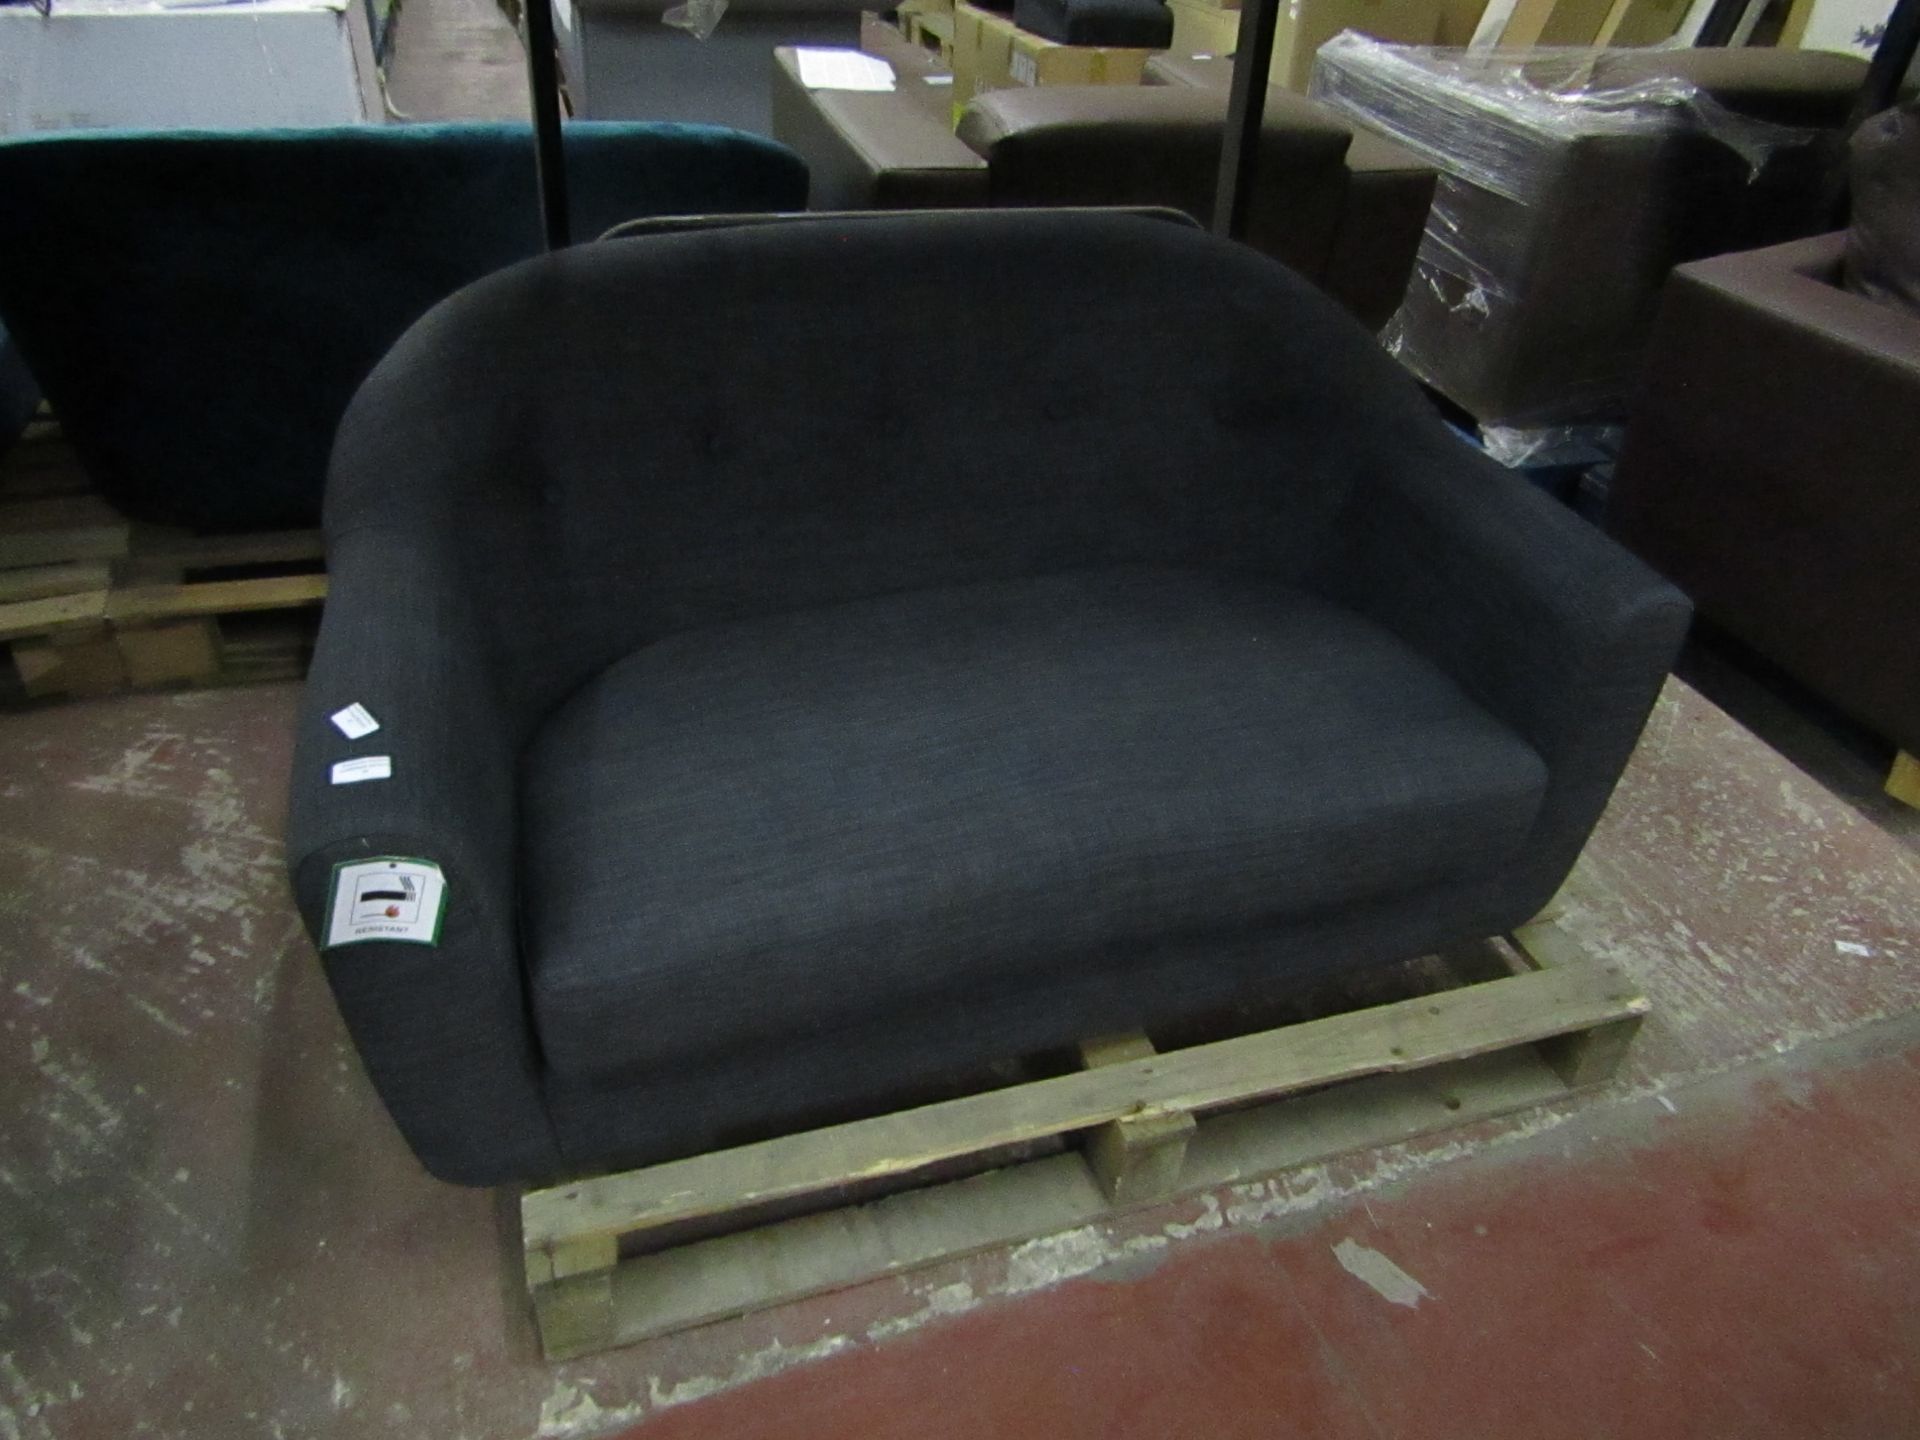 | 1X | MADE.COM LOTTIE 2 SEATER SOFA IN DARK GREY |RRP £399 | GOOD CONDITION BUT NO FEET PRESENT |